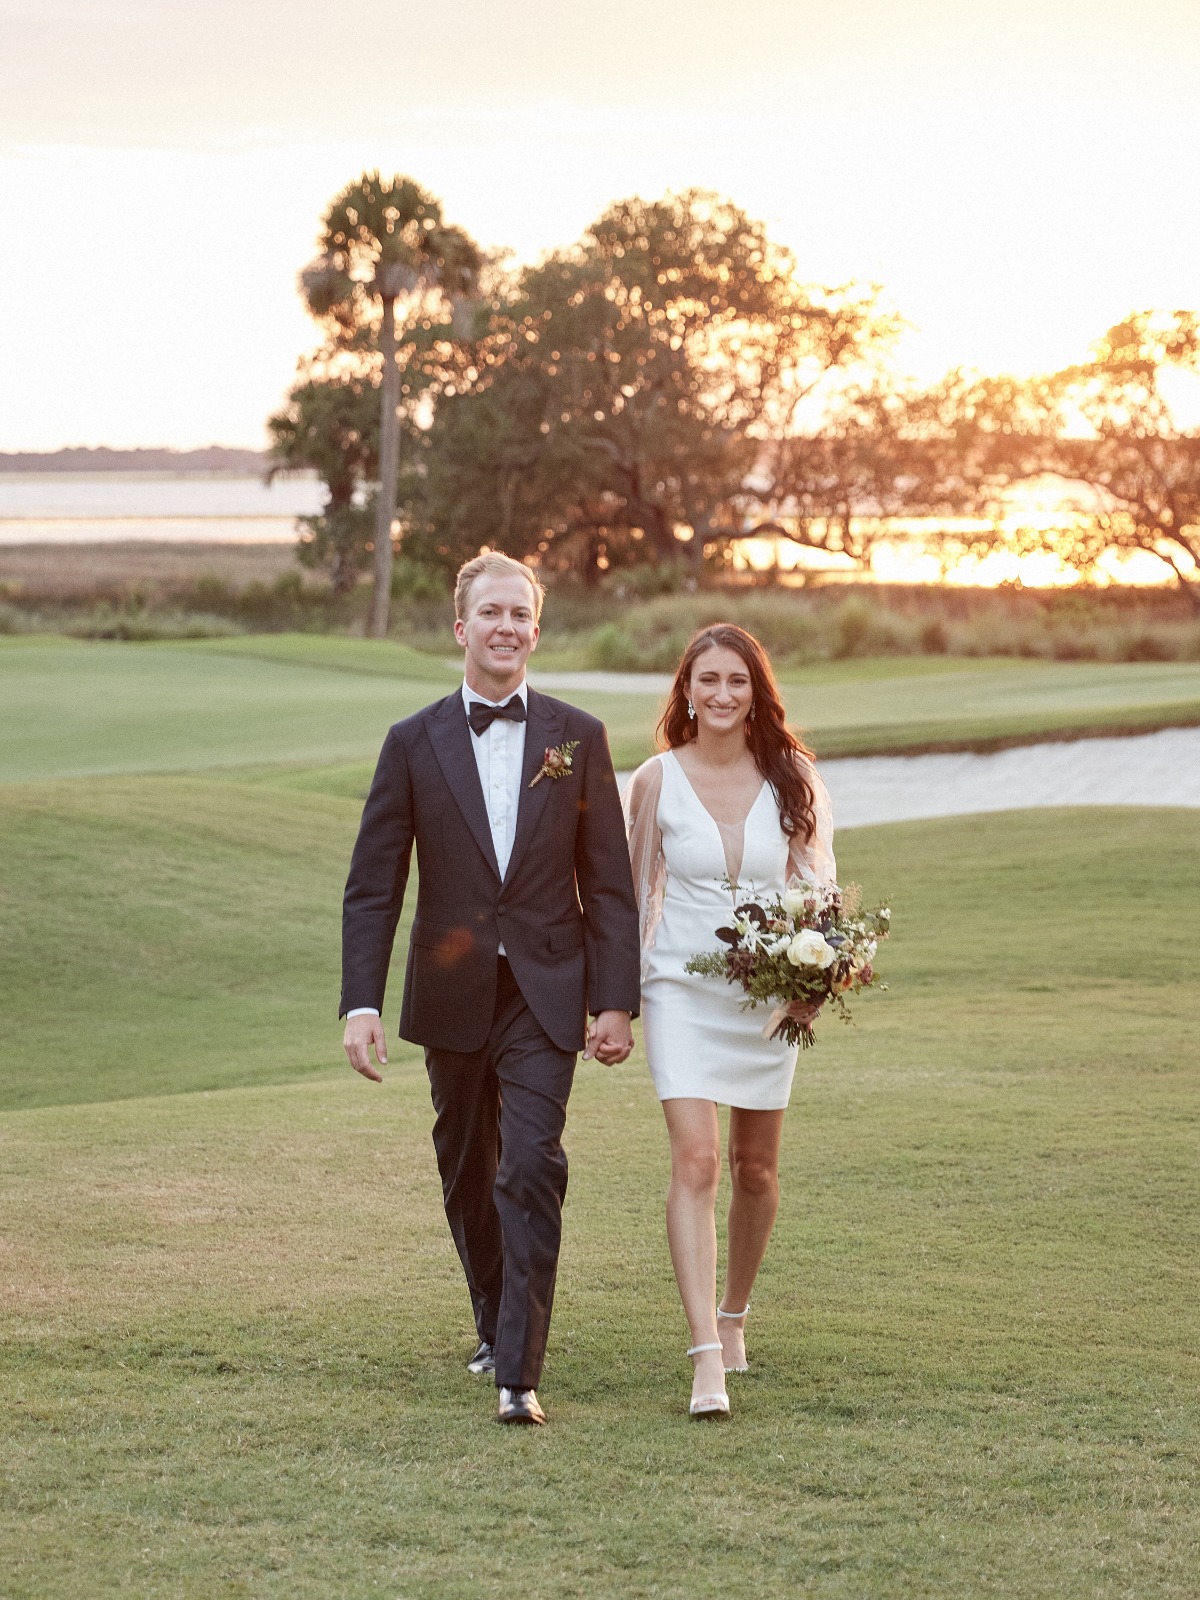 Bride and groom walking and holding hands on golf course